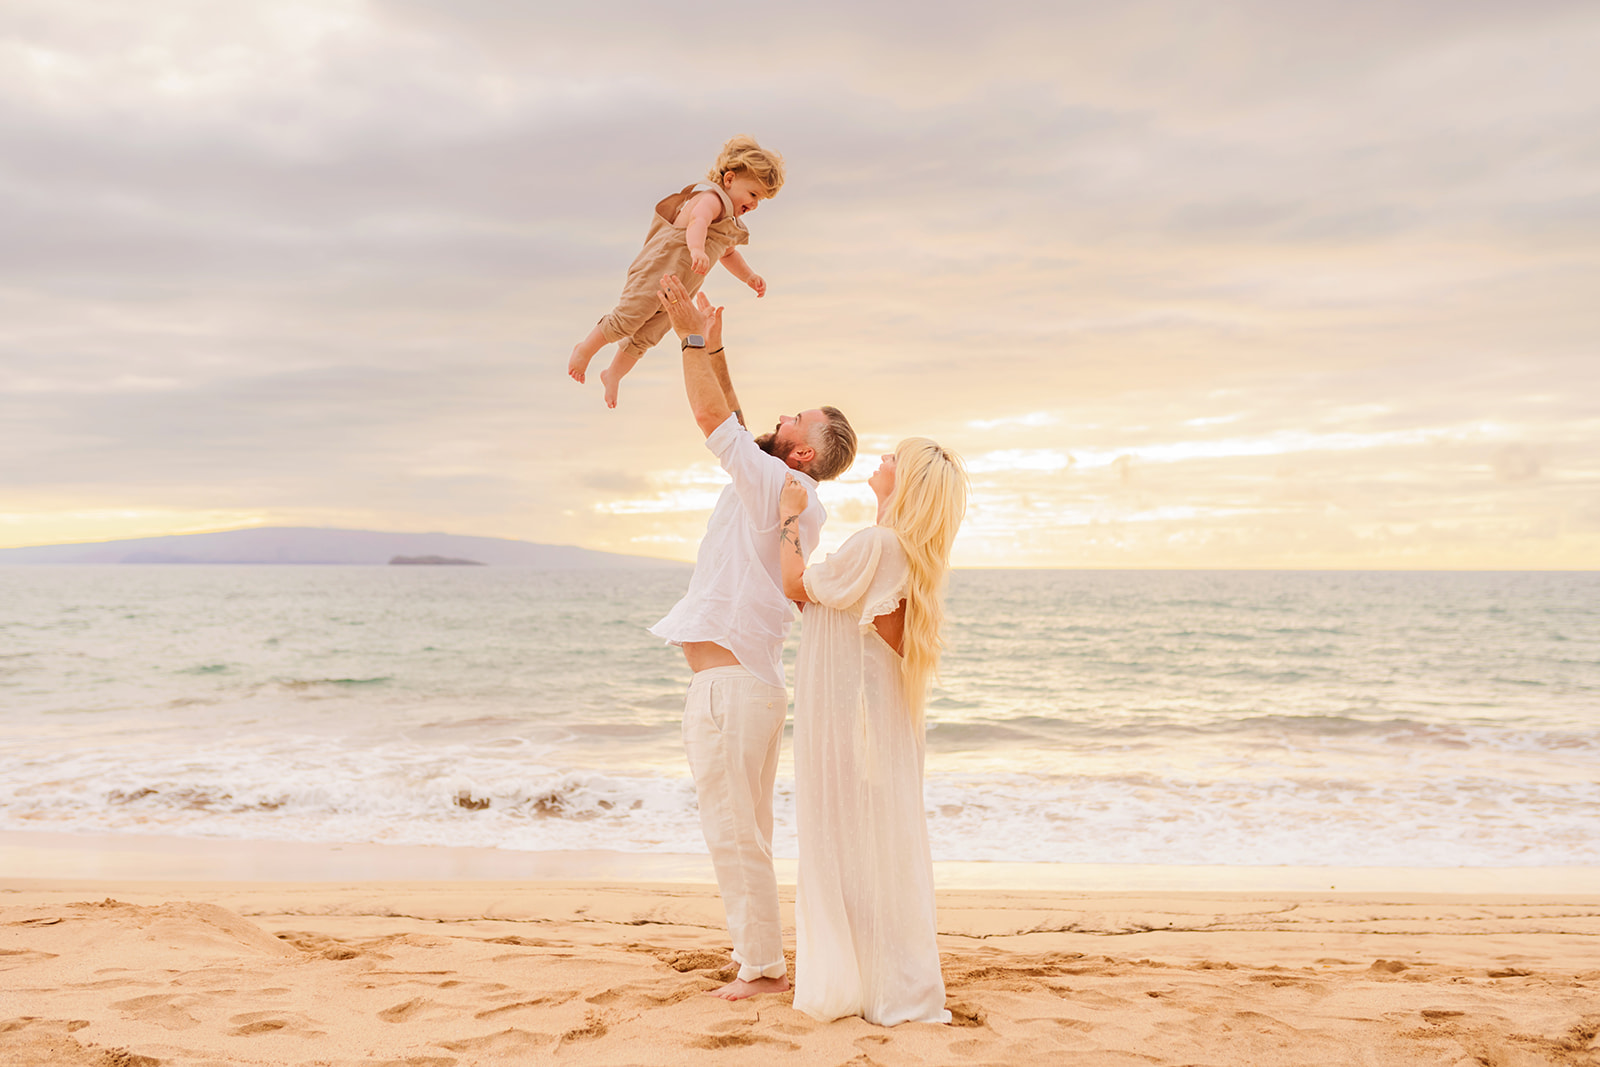 A father throws his toddler in the air while his pregnant wife watches during a maternity photoshoot on the beach on Maui.